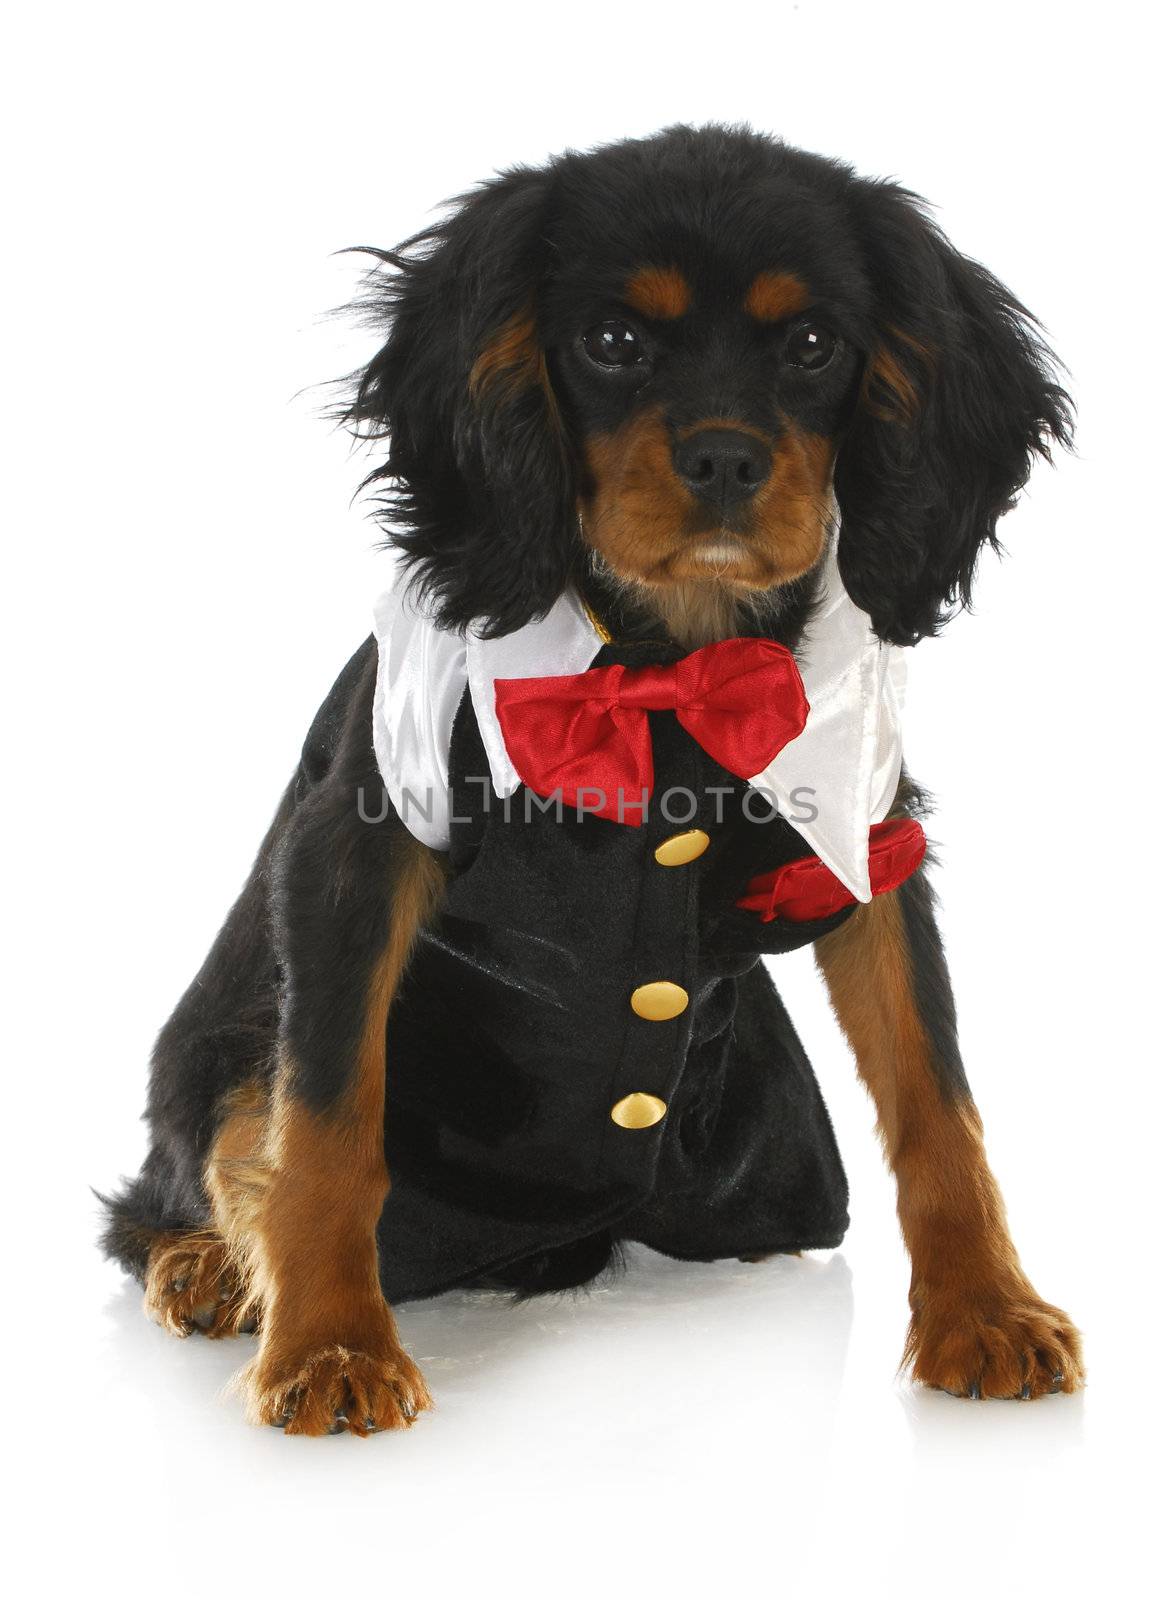 formal dog - cavalier king charles spaniel dressed up in a tuxedo on white background